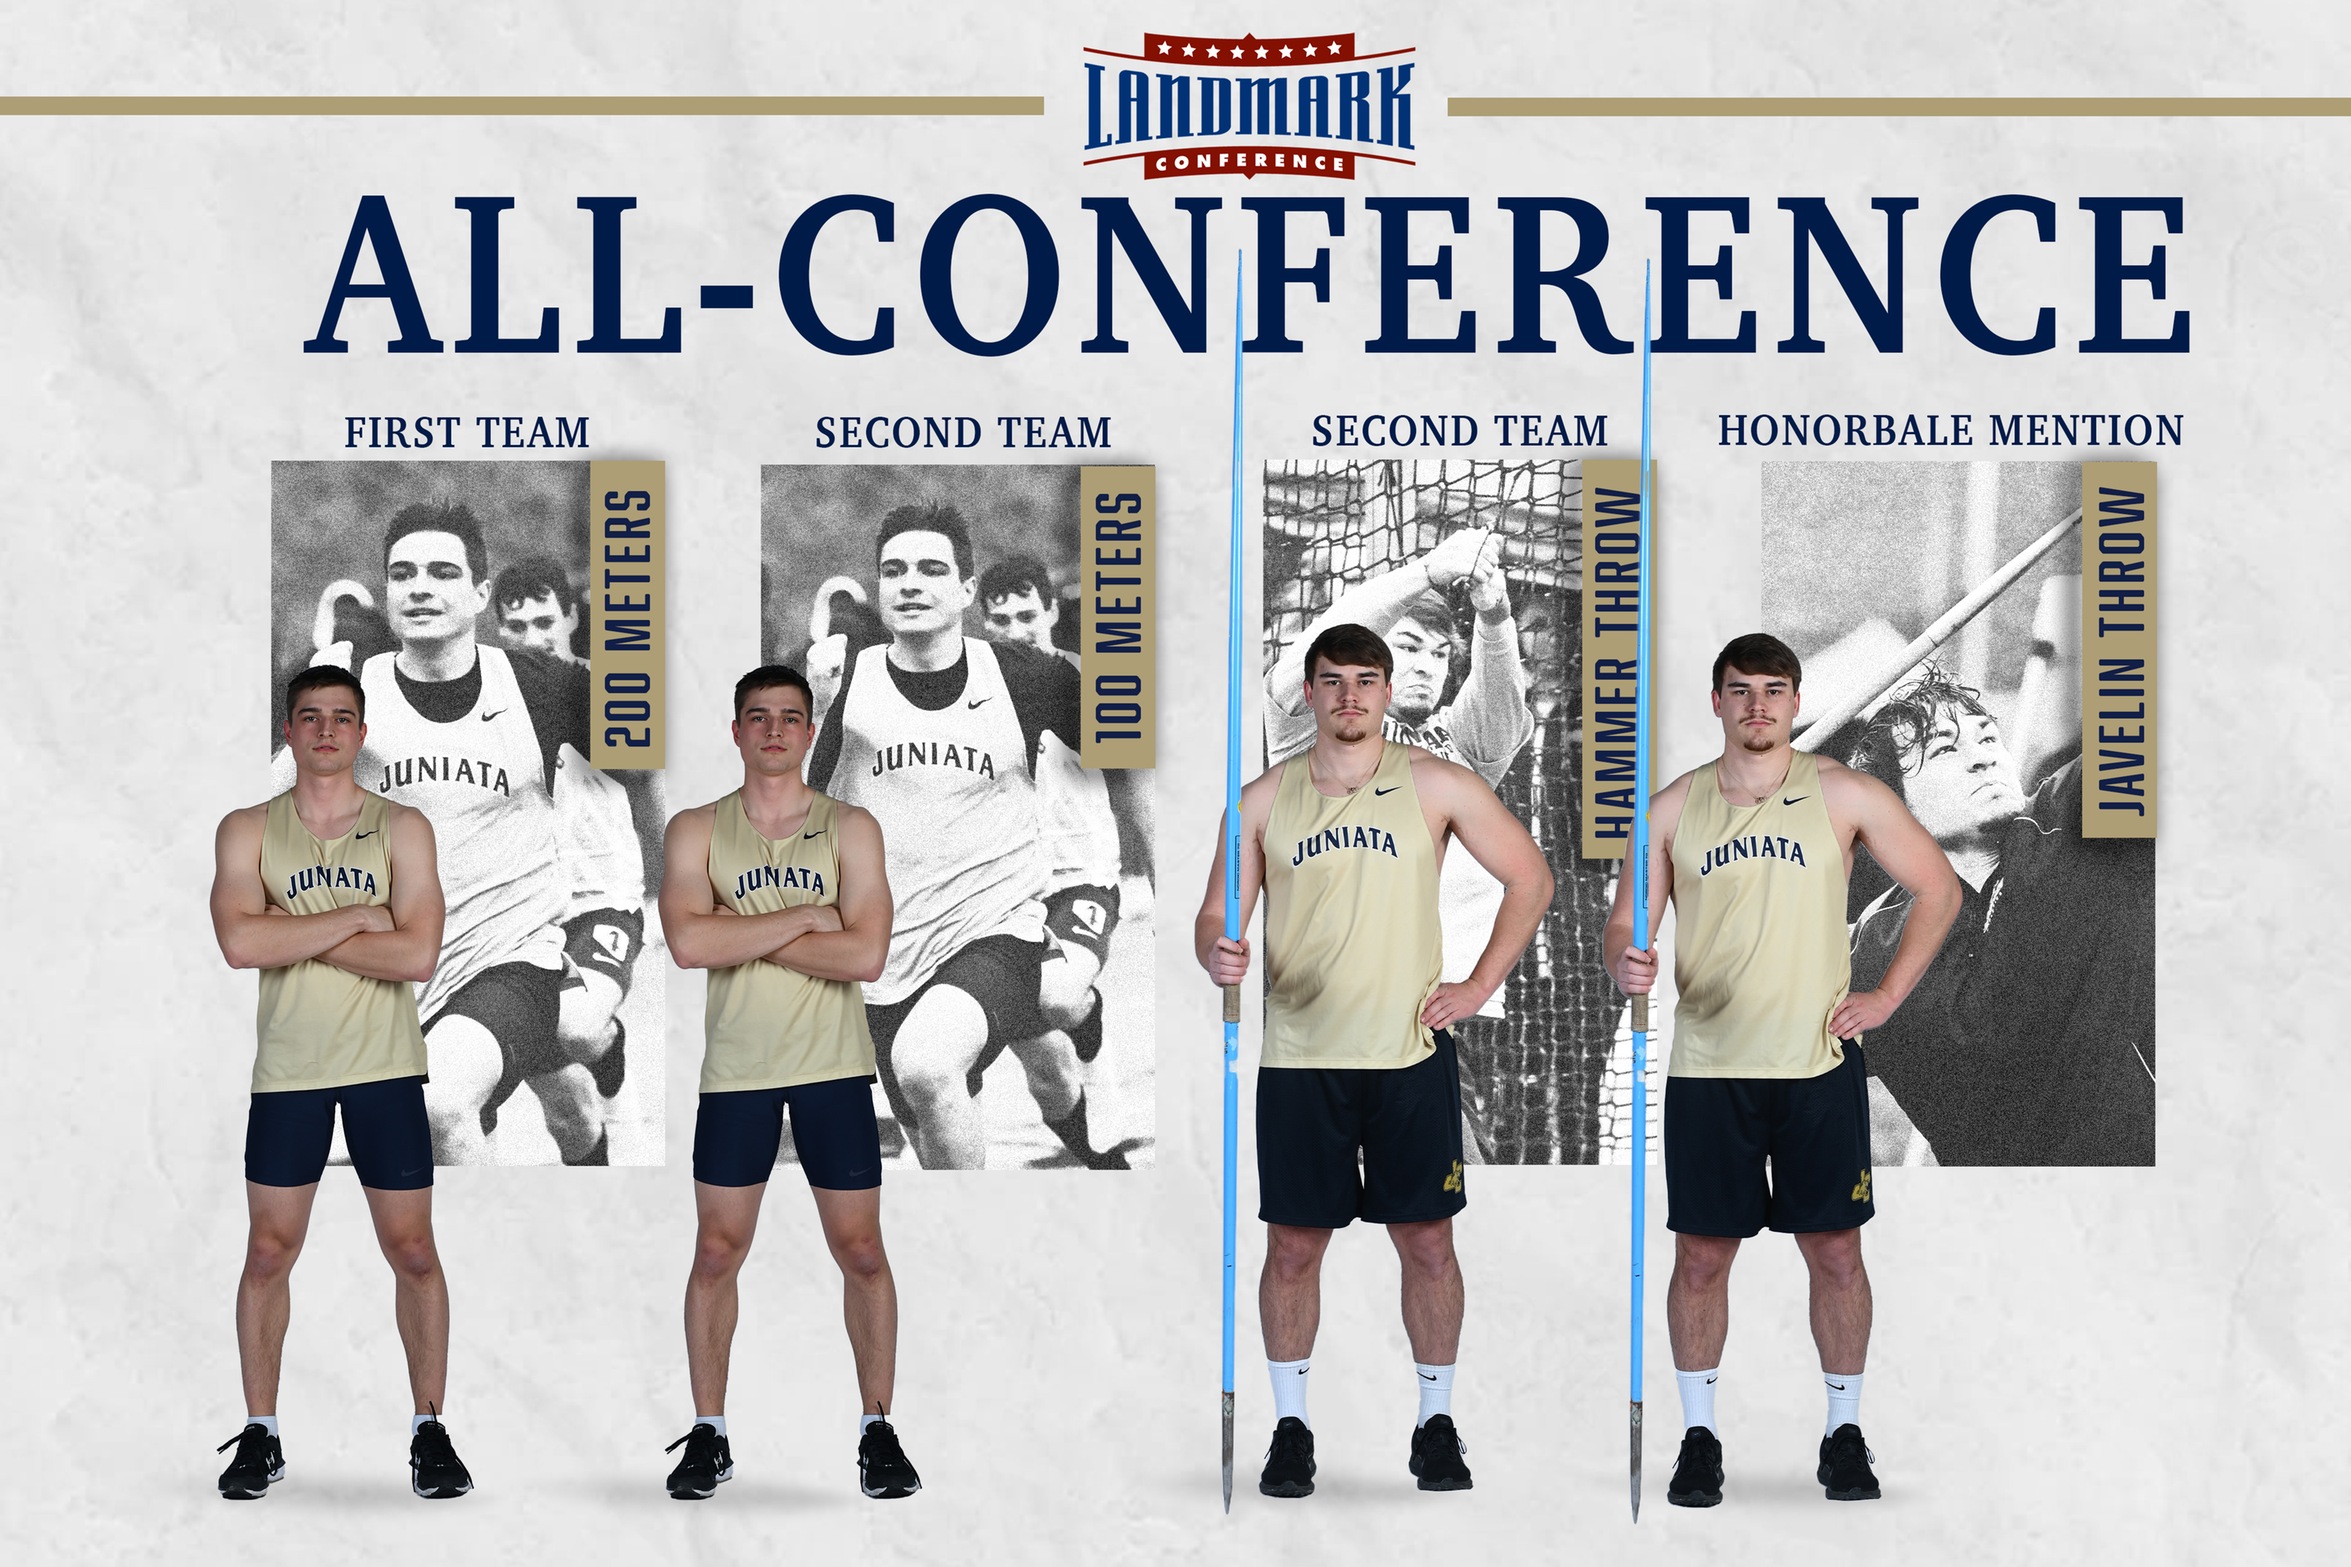 Lewis and Walters Each Earn Two Landmark All-Conference Selections